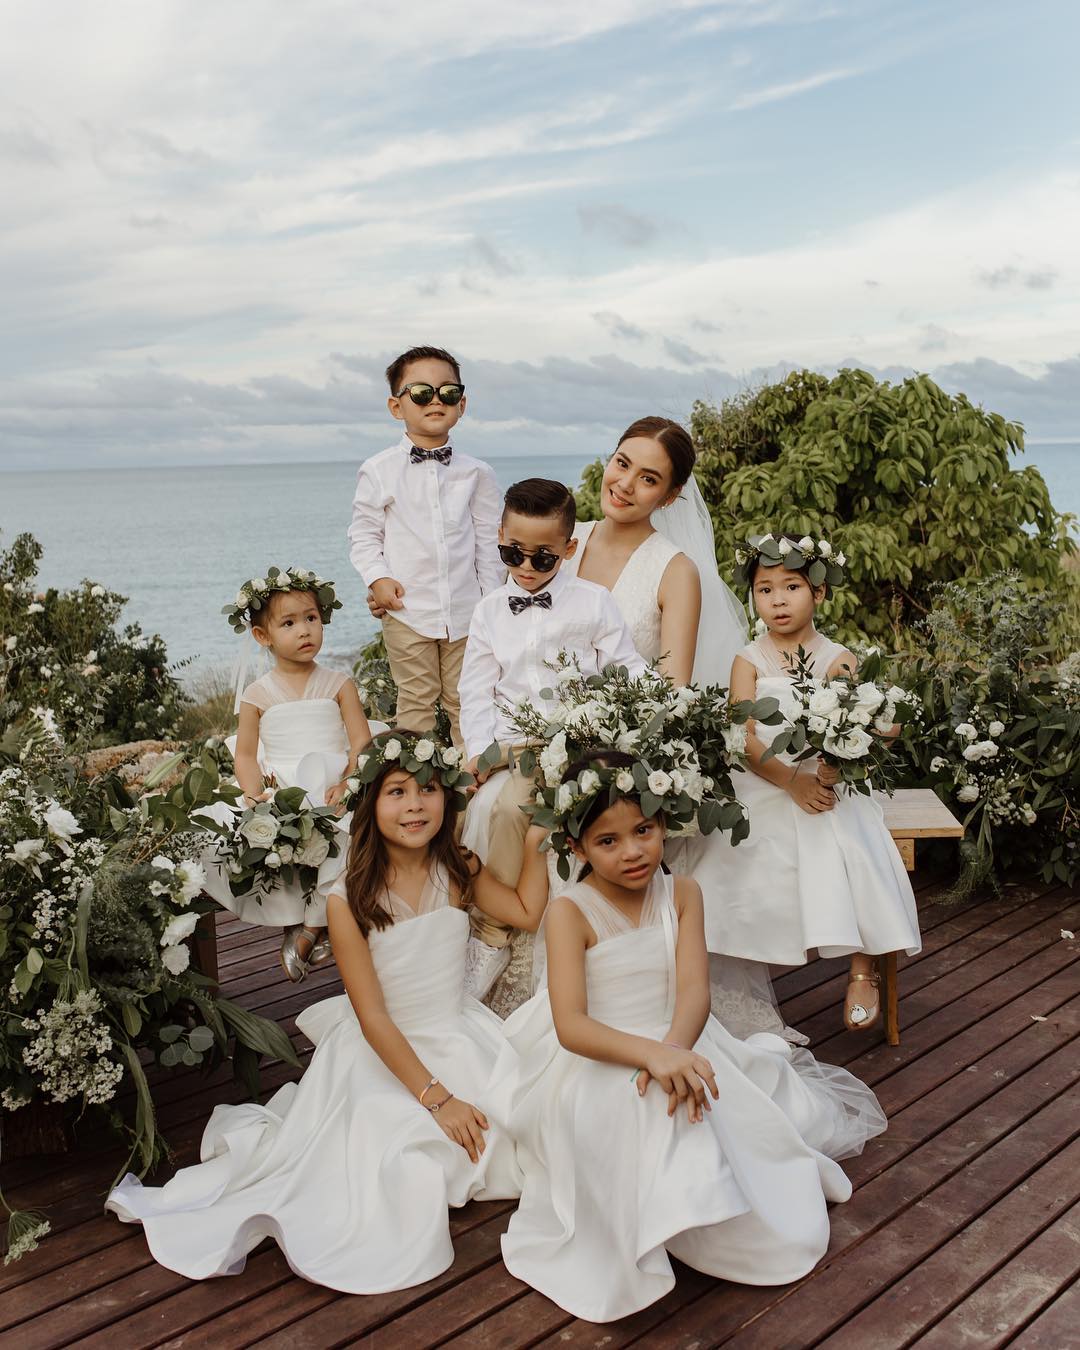 flower girl photo ideas all together with bride theweddingblissthailand